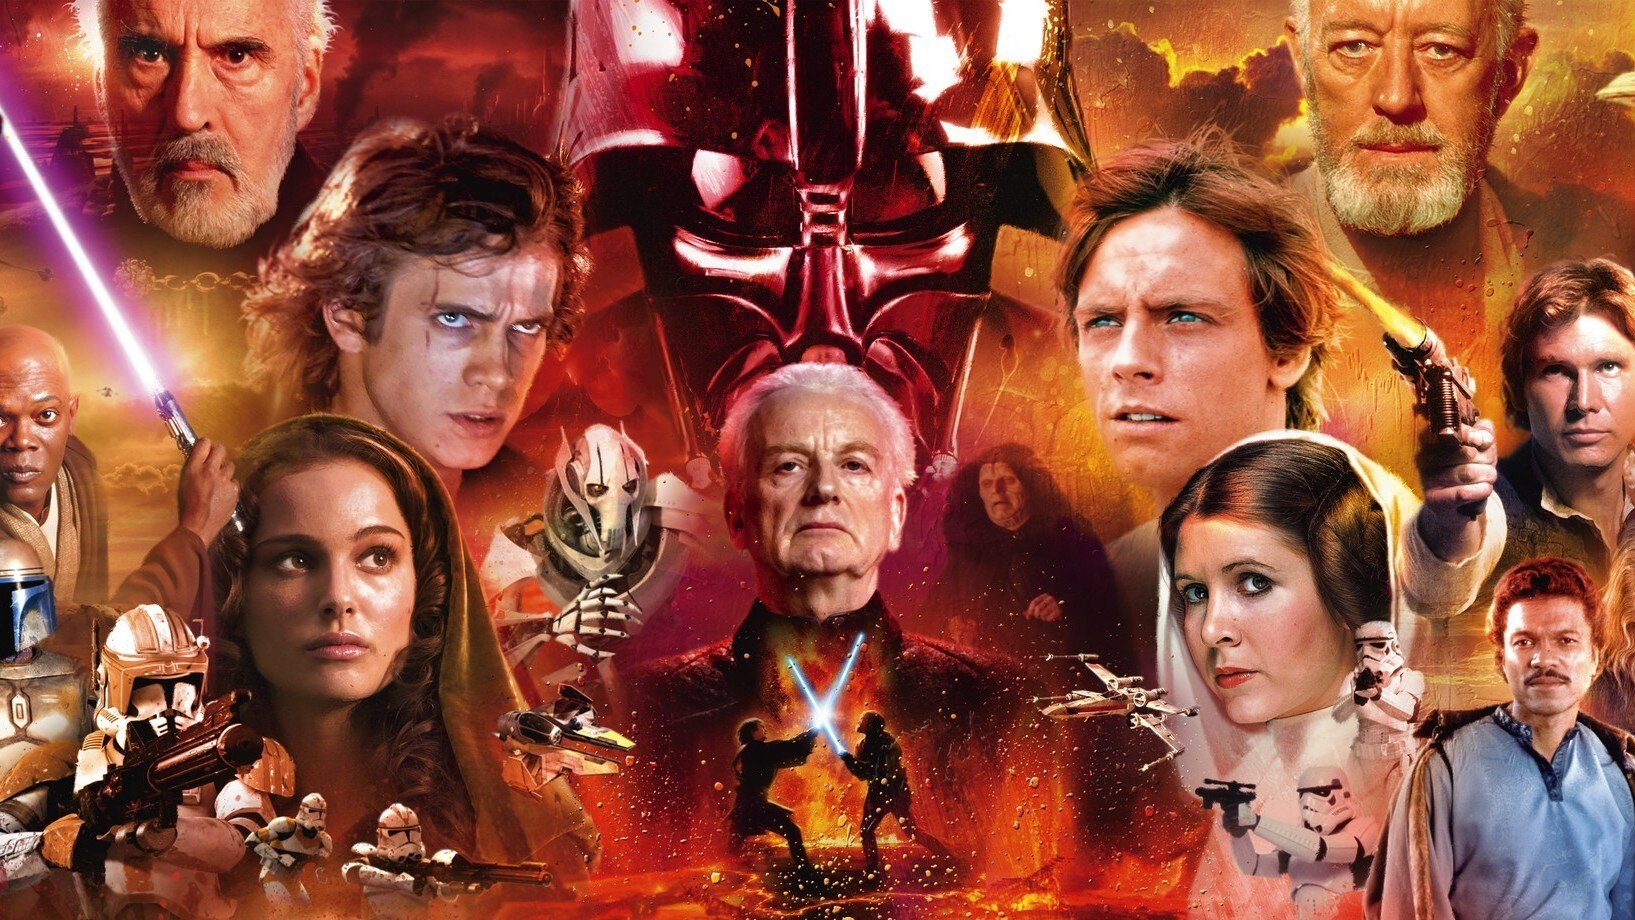 Poll: Which Star Wars Movie Is Your Favorite?